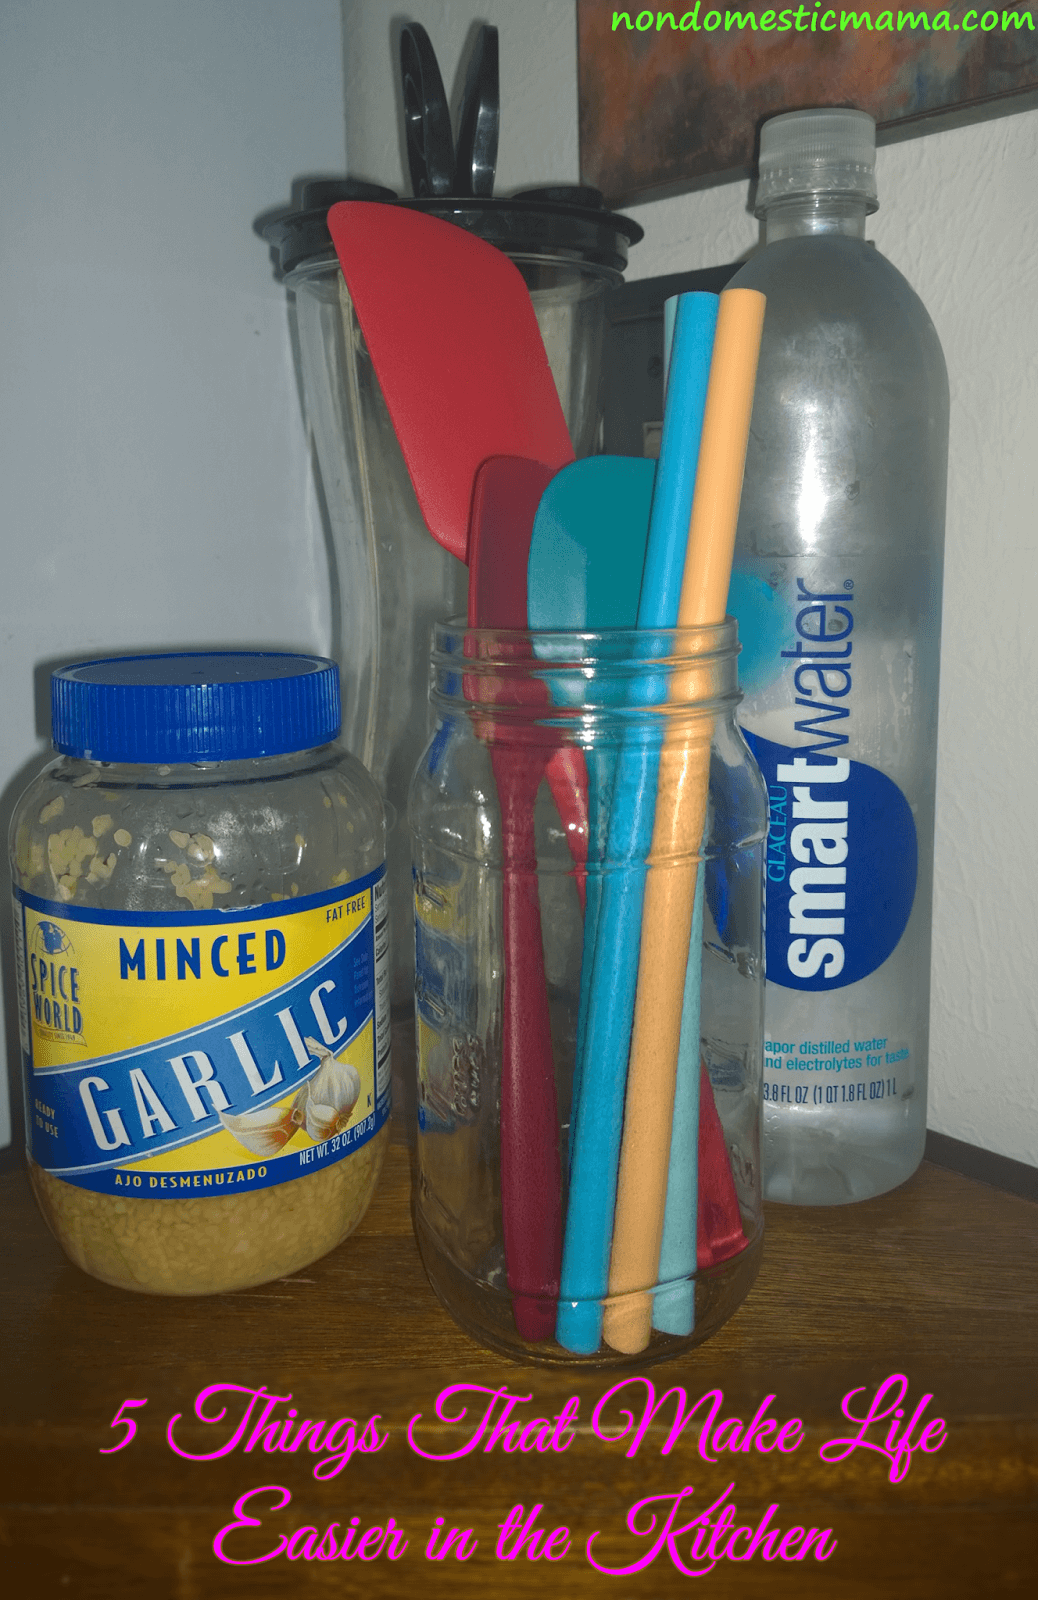 5 Favorite Things That Make Life Easier in the Kitchen